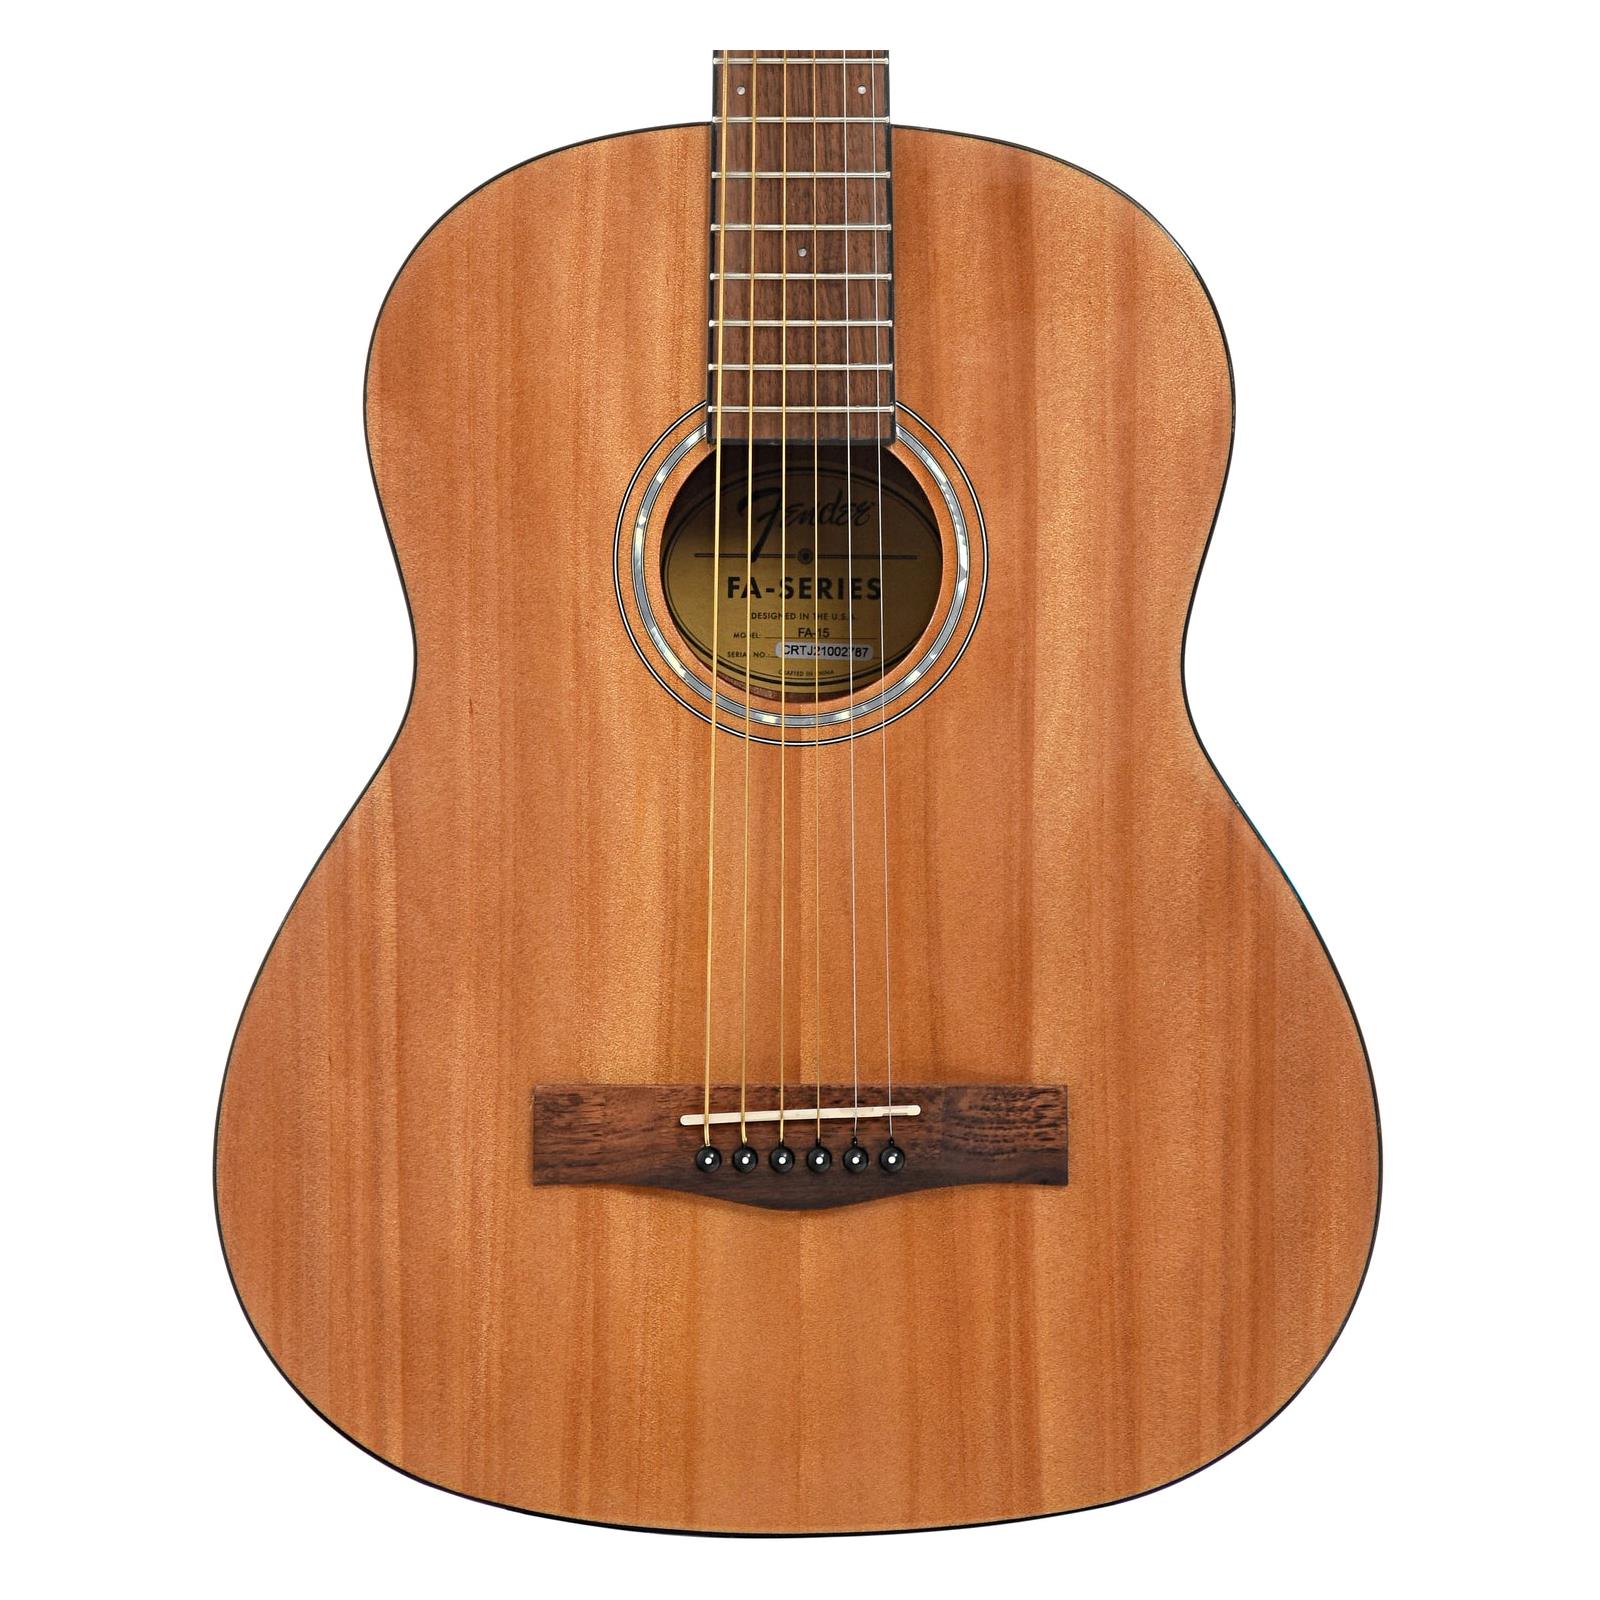 Fender FA-15 3/4 Scale Steel String Acoustic Guitar, Natural, with Gig Bag